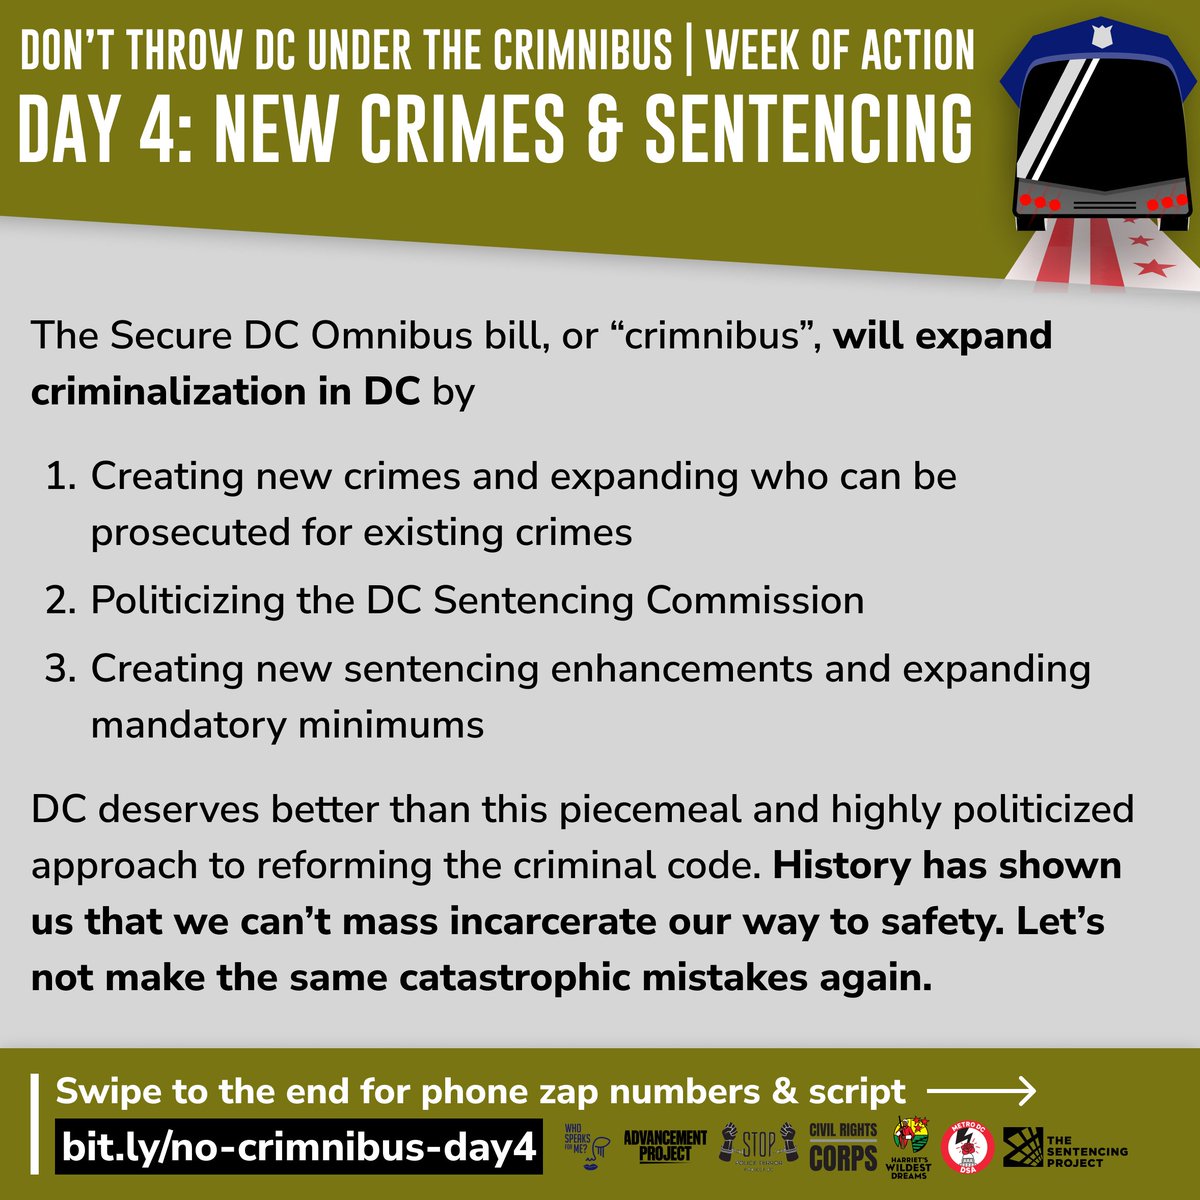 It's Day 4 of the Don’t Throw DC Under the Crimnibus Week of Action! Our pressure is working! Call & email @councilofdc to tell them NOT to create new crimes, expand prosecution, lengthen prison sentences, and more in Secure DC (“crimnibus”): bit.ly/no-crimnibus-d…